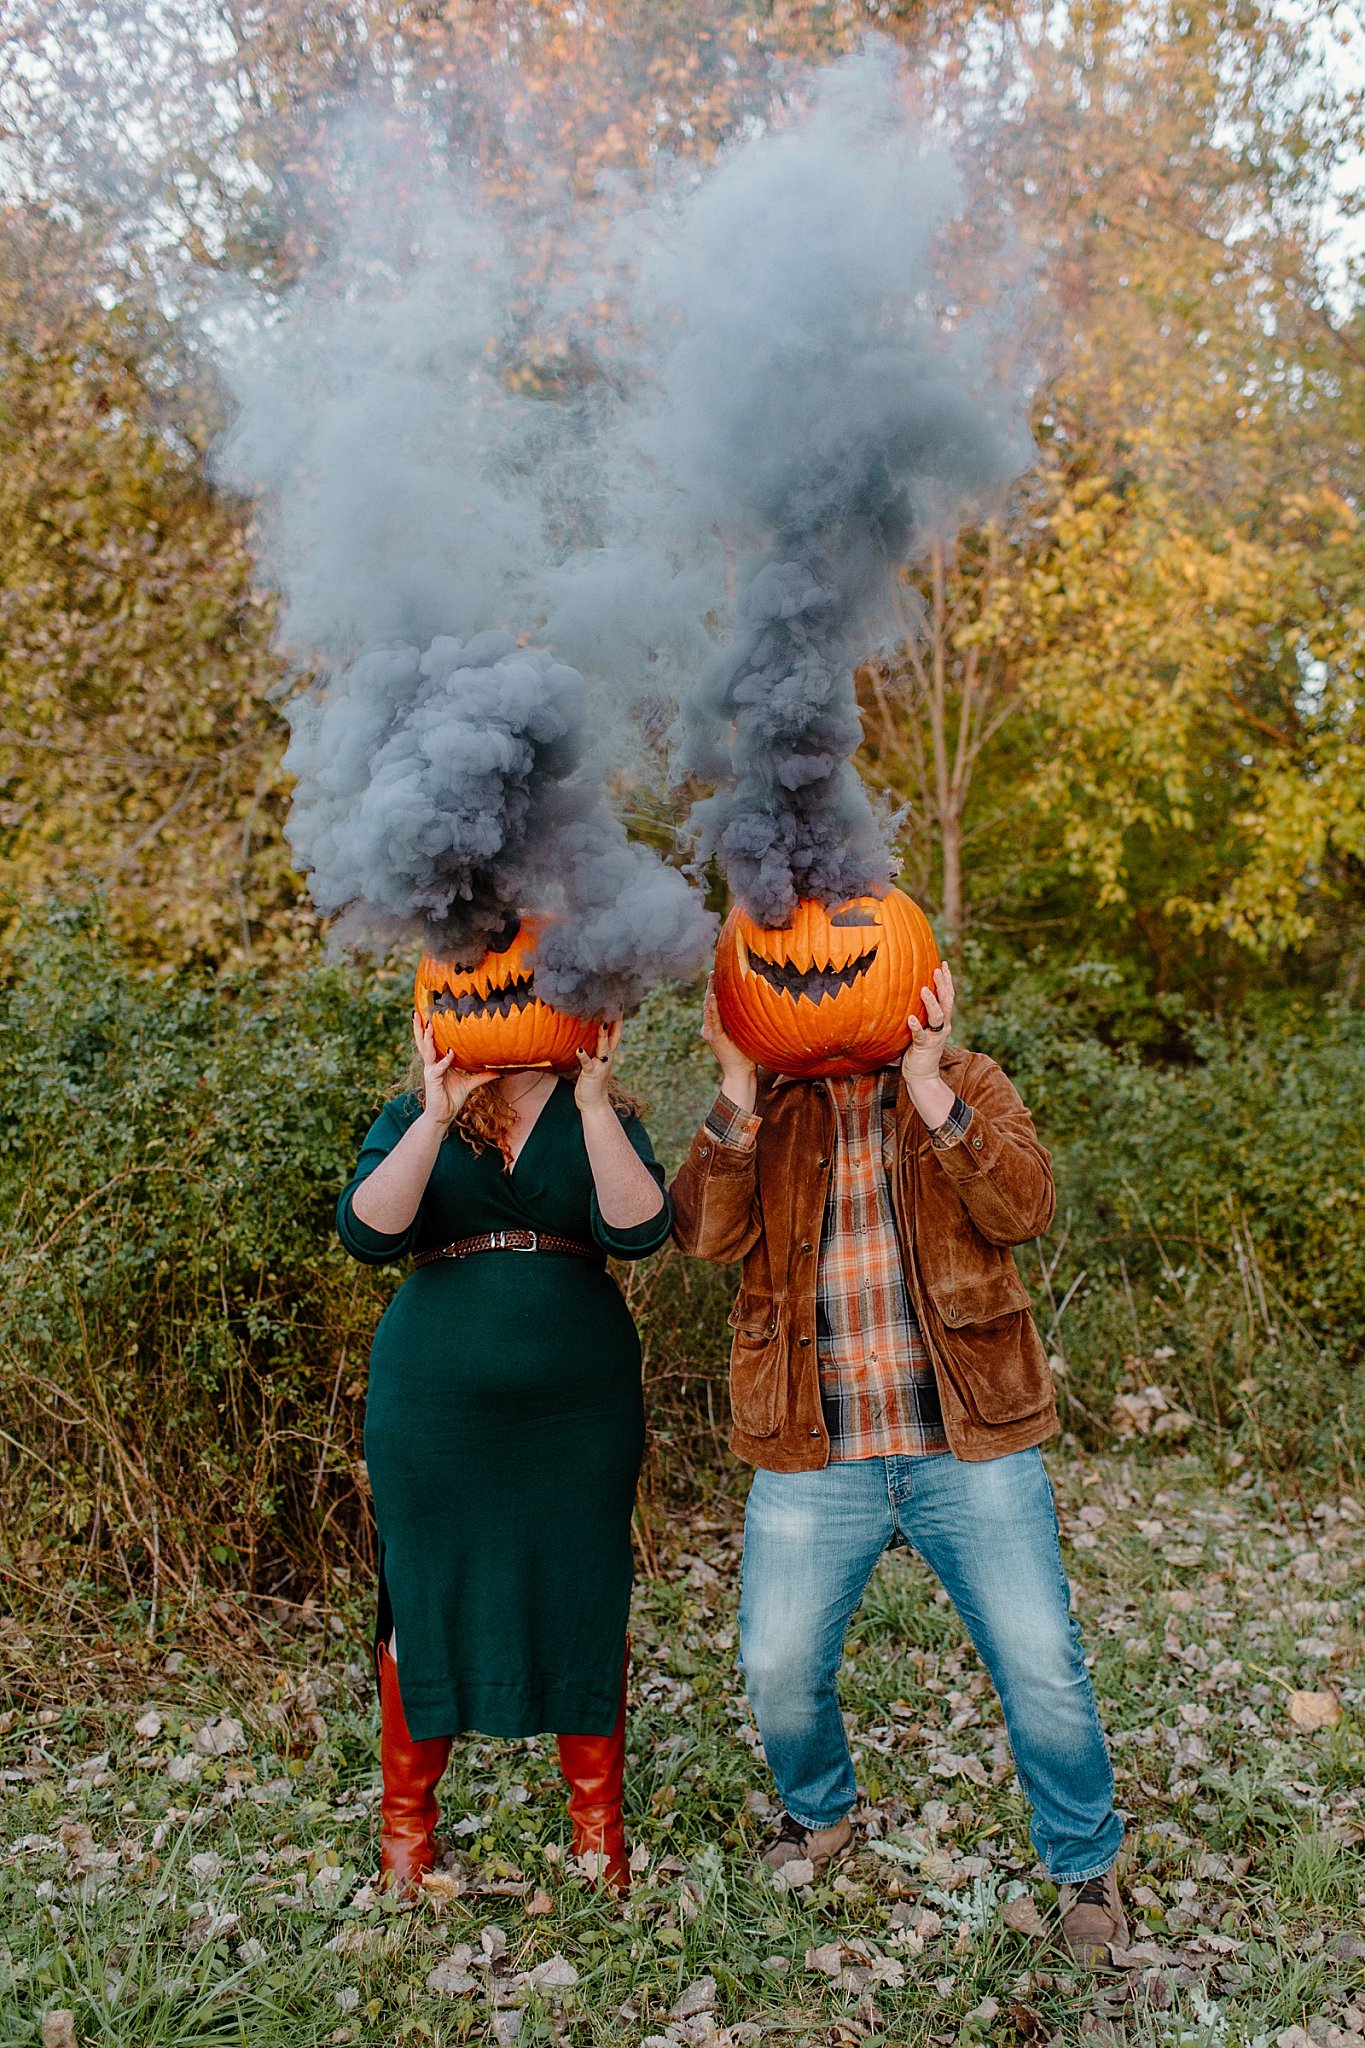  Two people stand with carved pumpkins over their heads for Halloween engagement session 